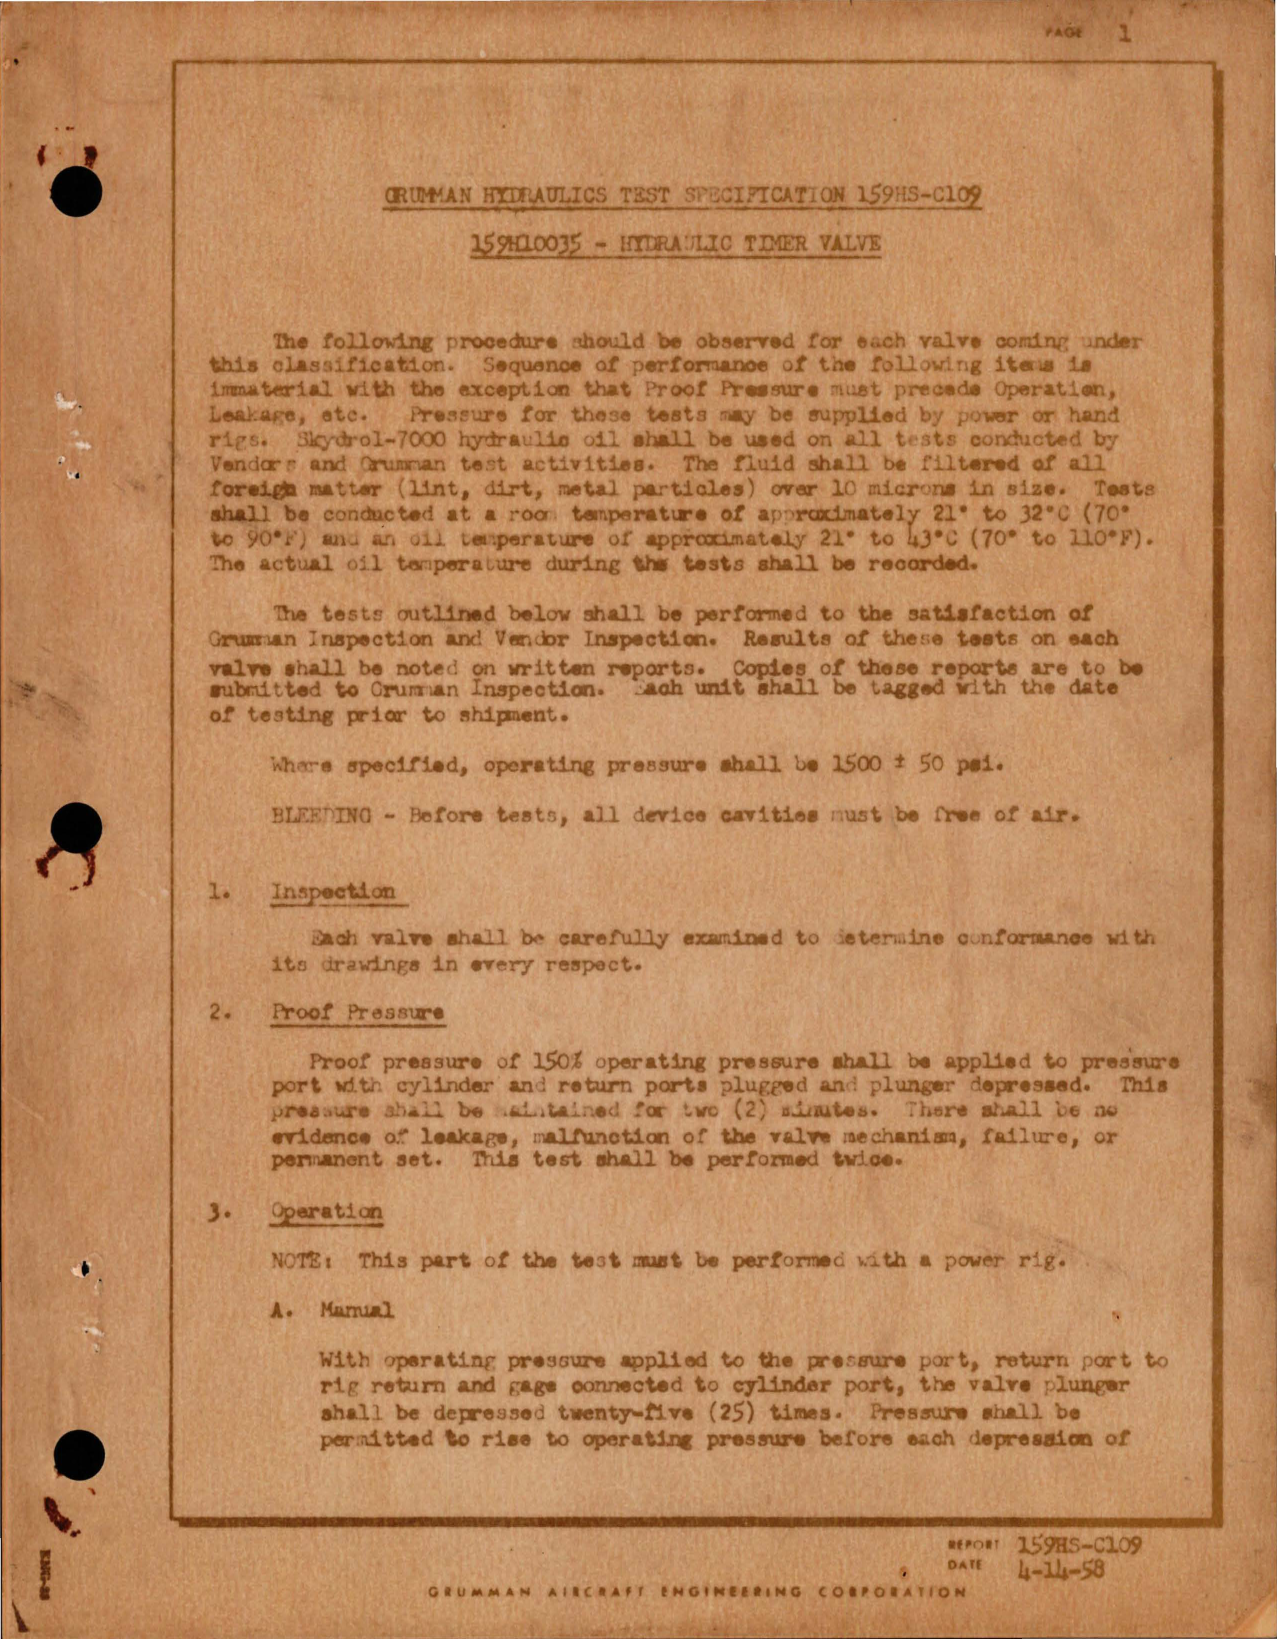 Sample page 1 from AirCorps Library document: Test Specification for Hydraulic Timer Valve - 159H10035 